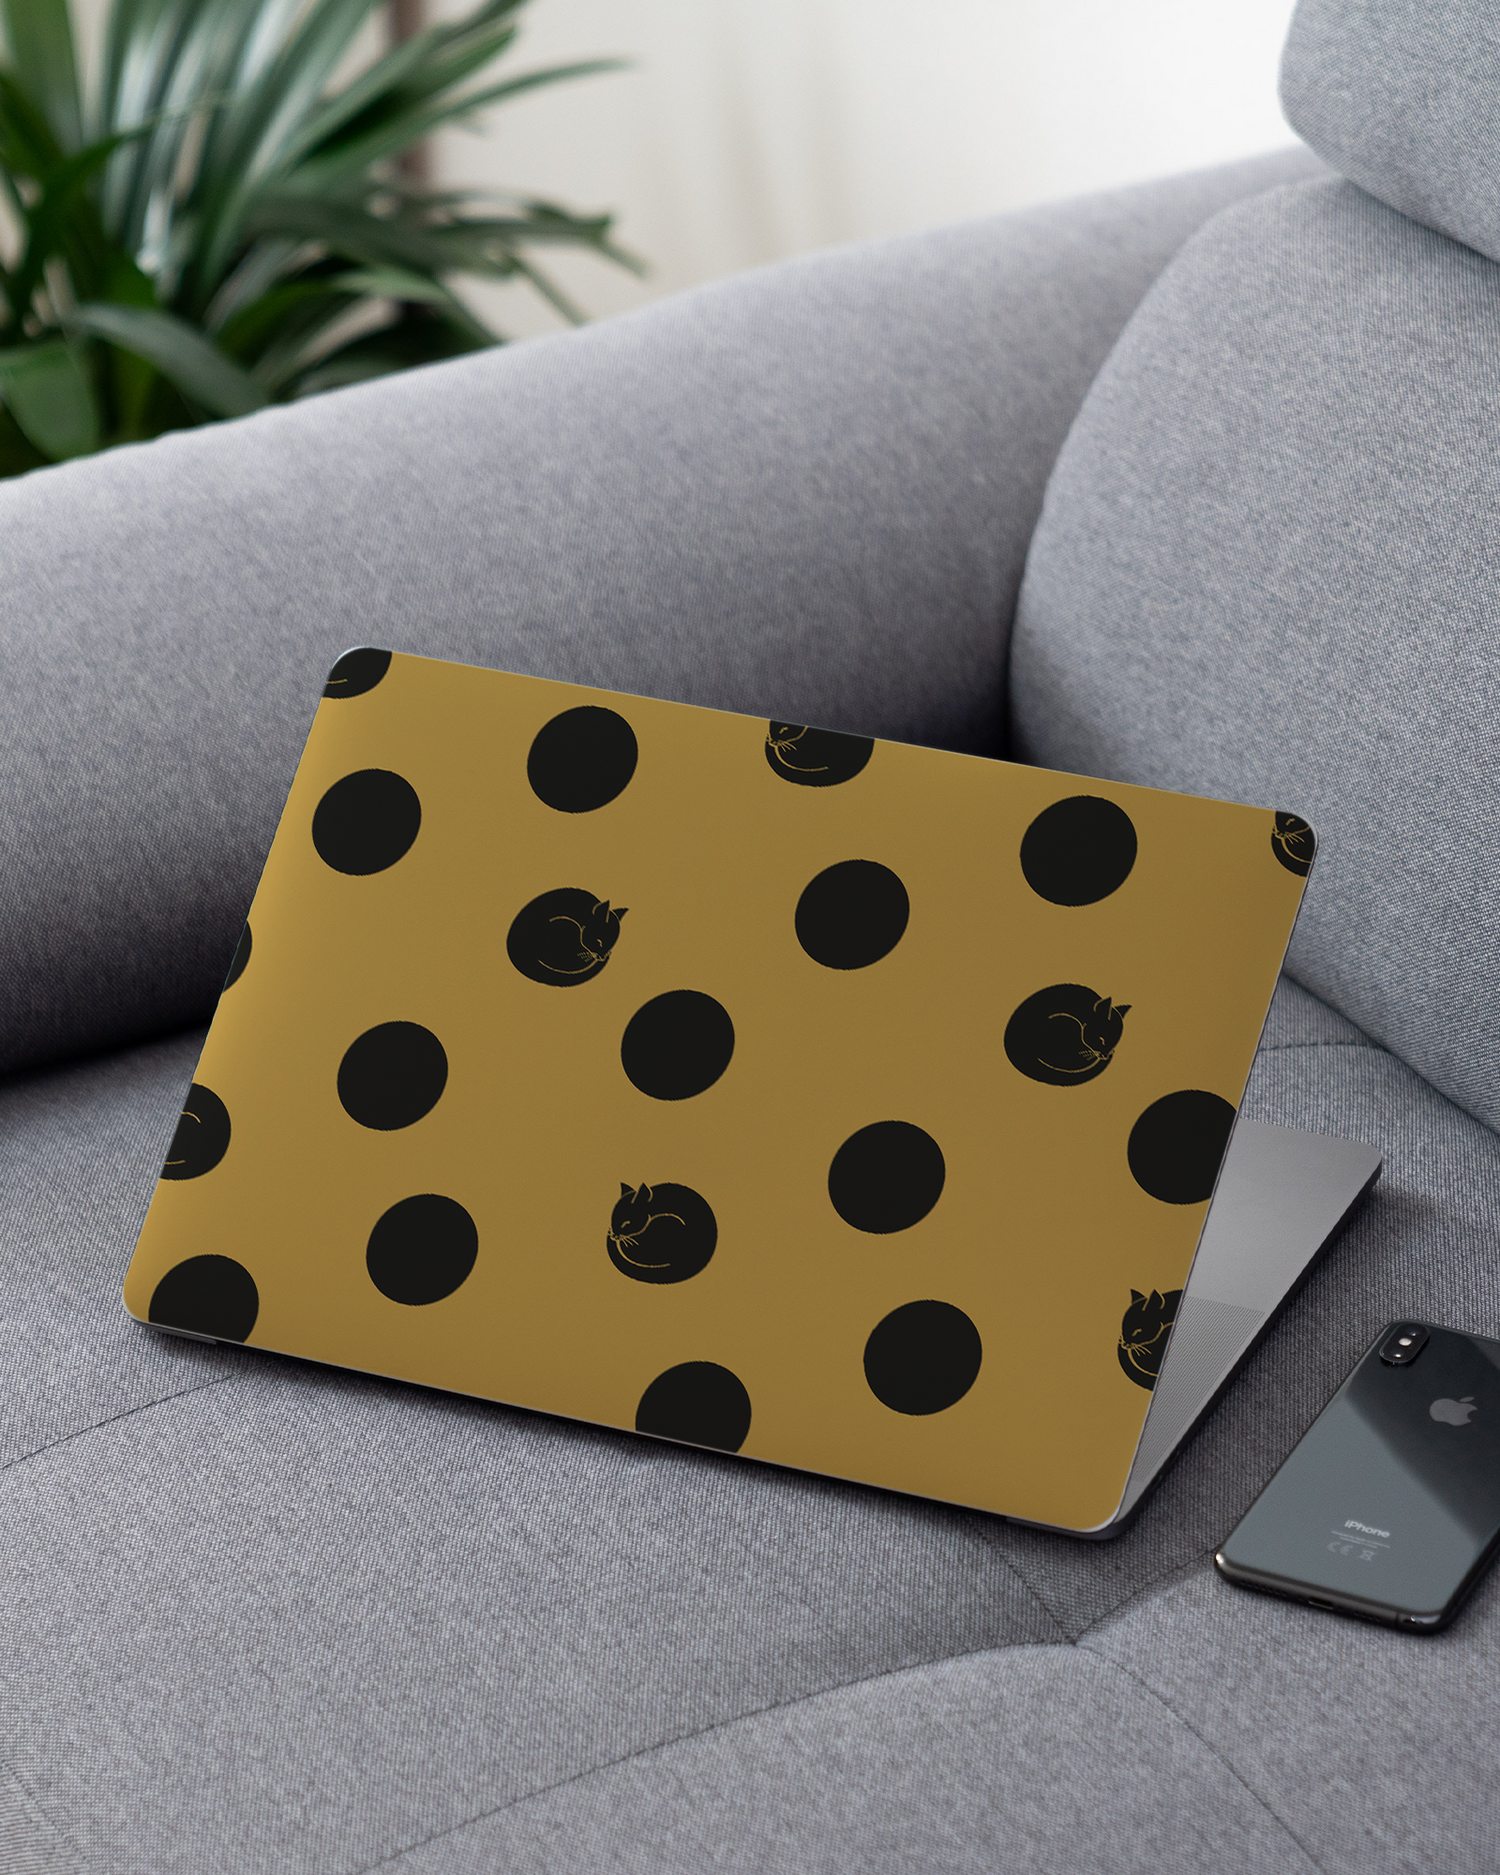 Polka Cats Laptop Skin for 13 inch Apple MacBooks on a couch